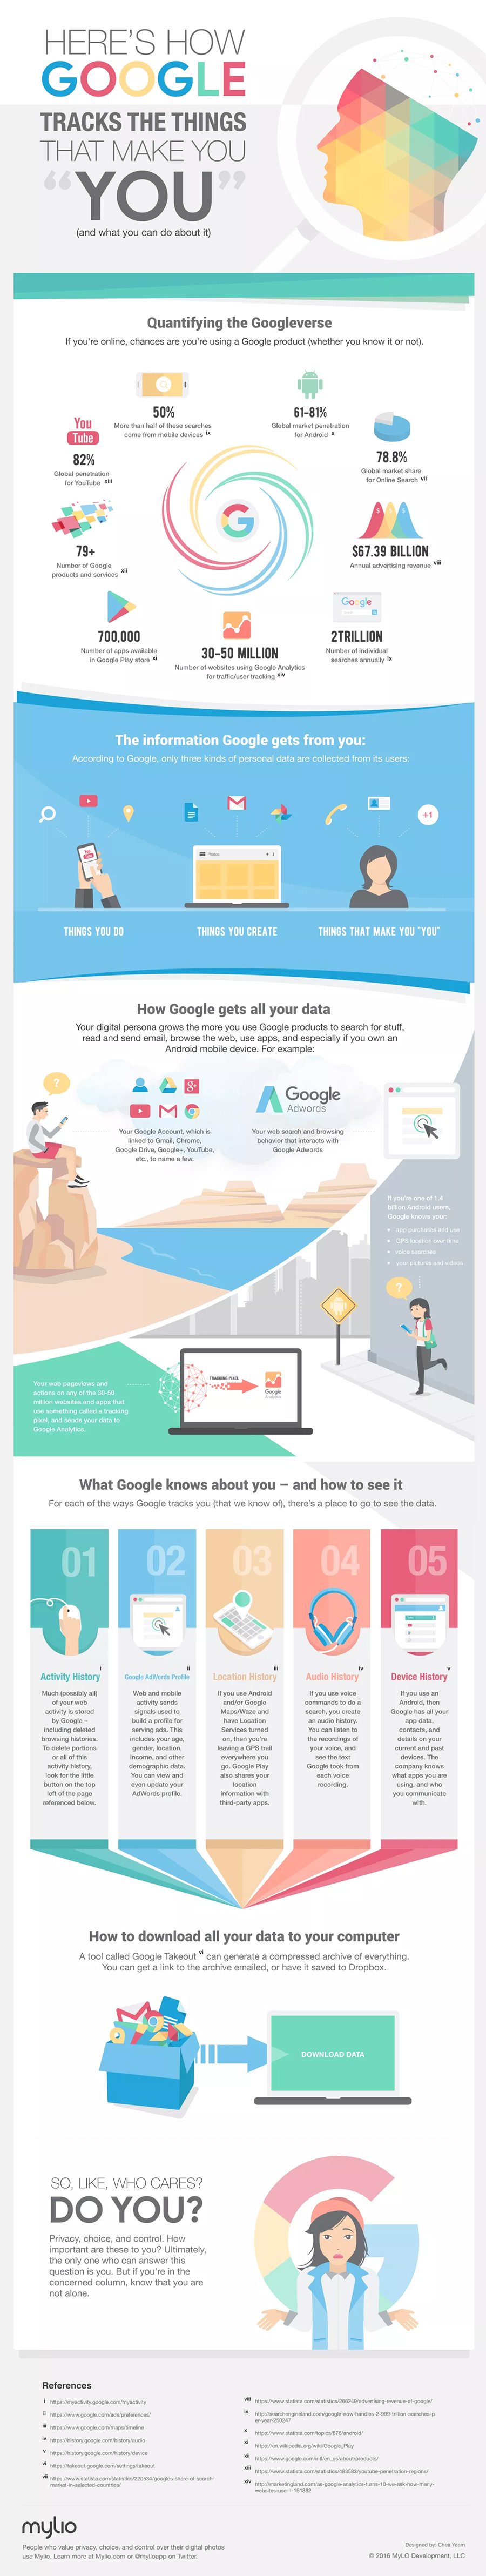 Google is Watching You Infographic